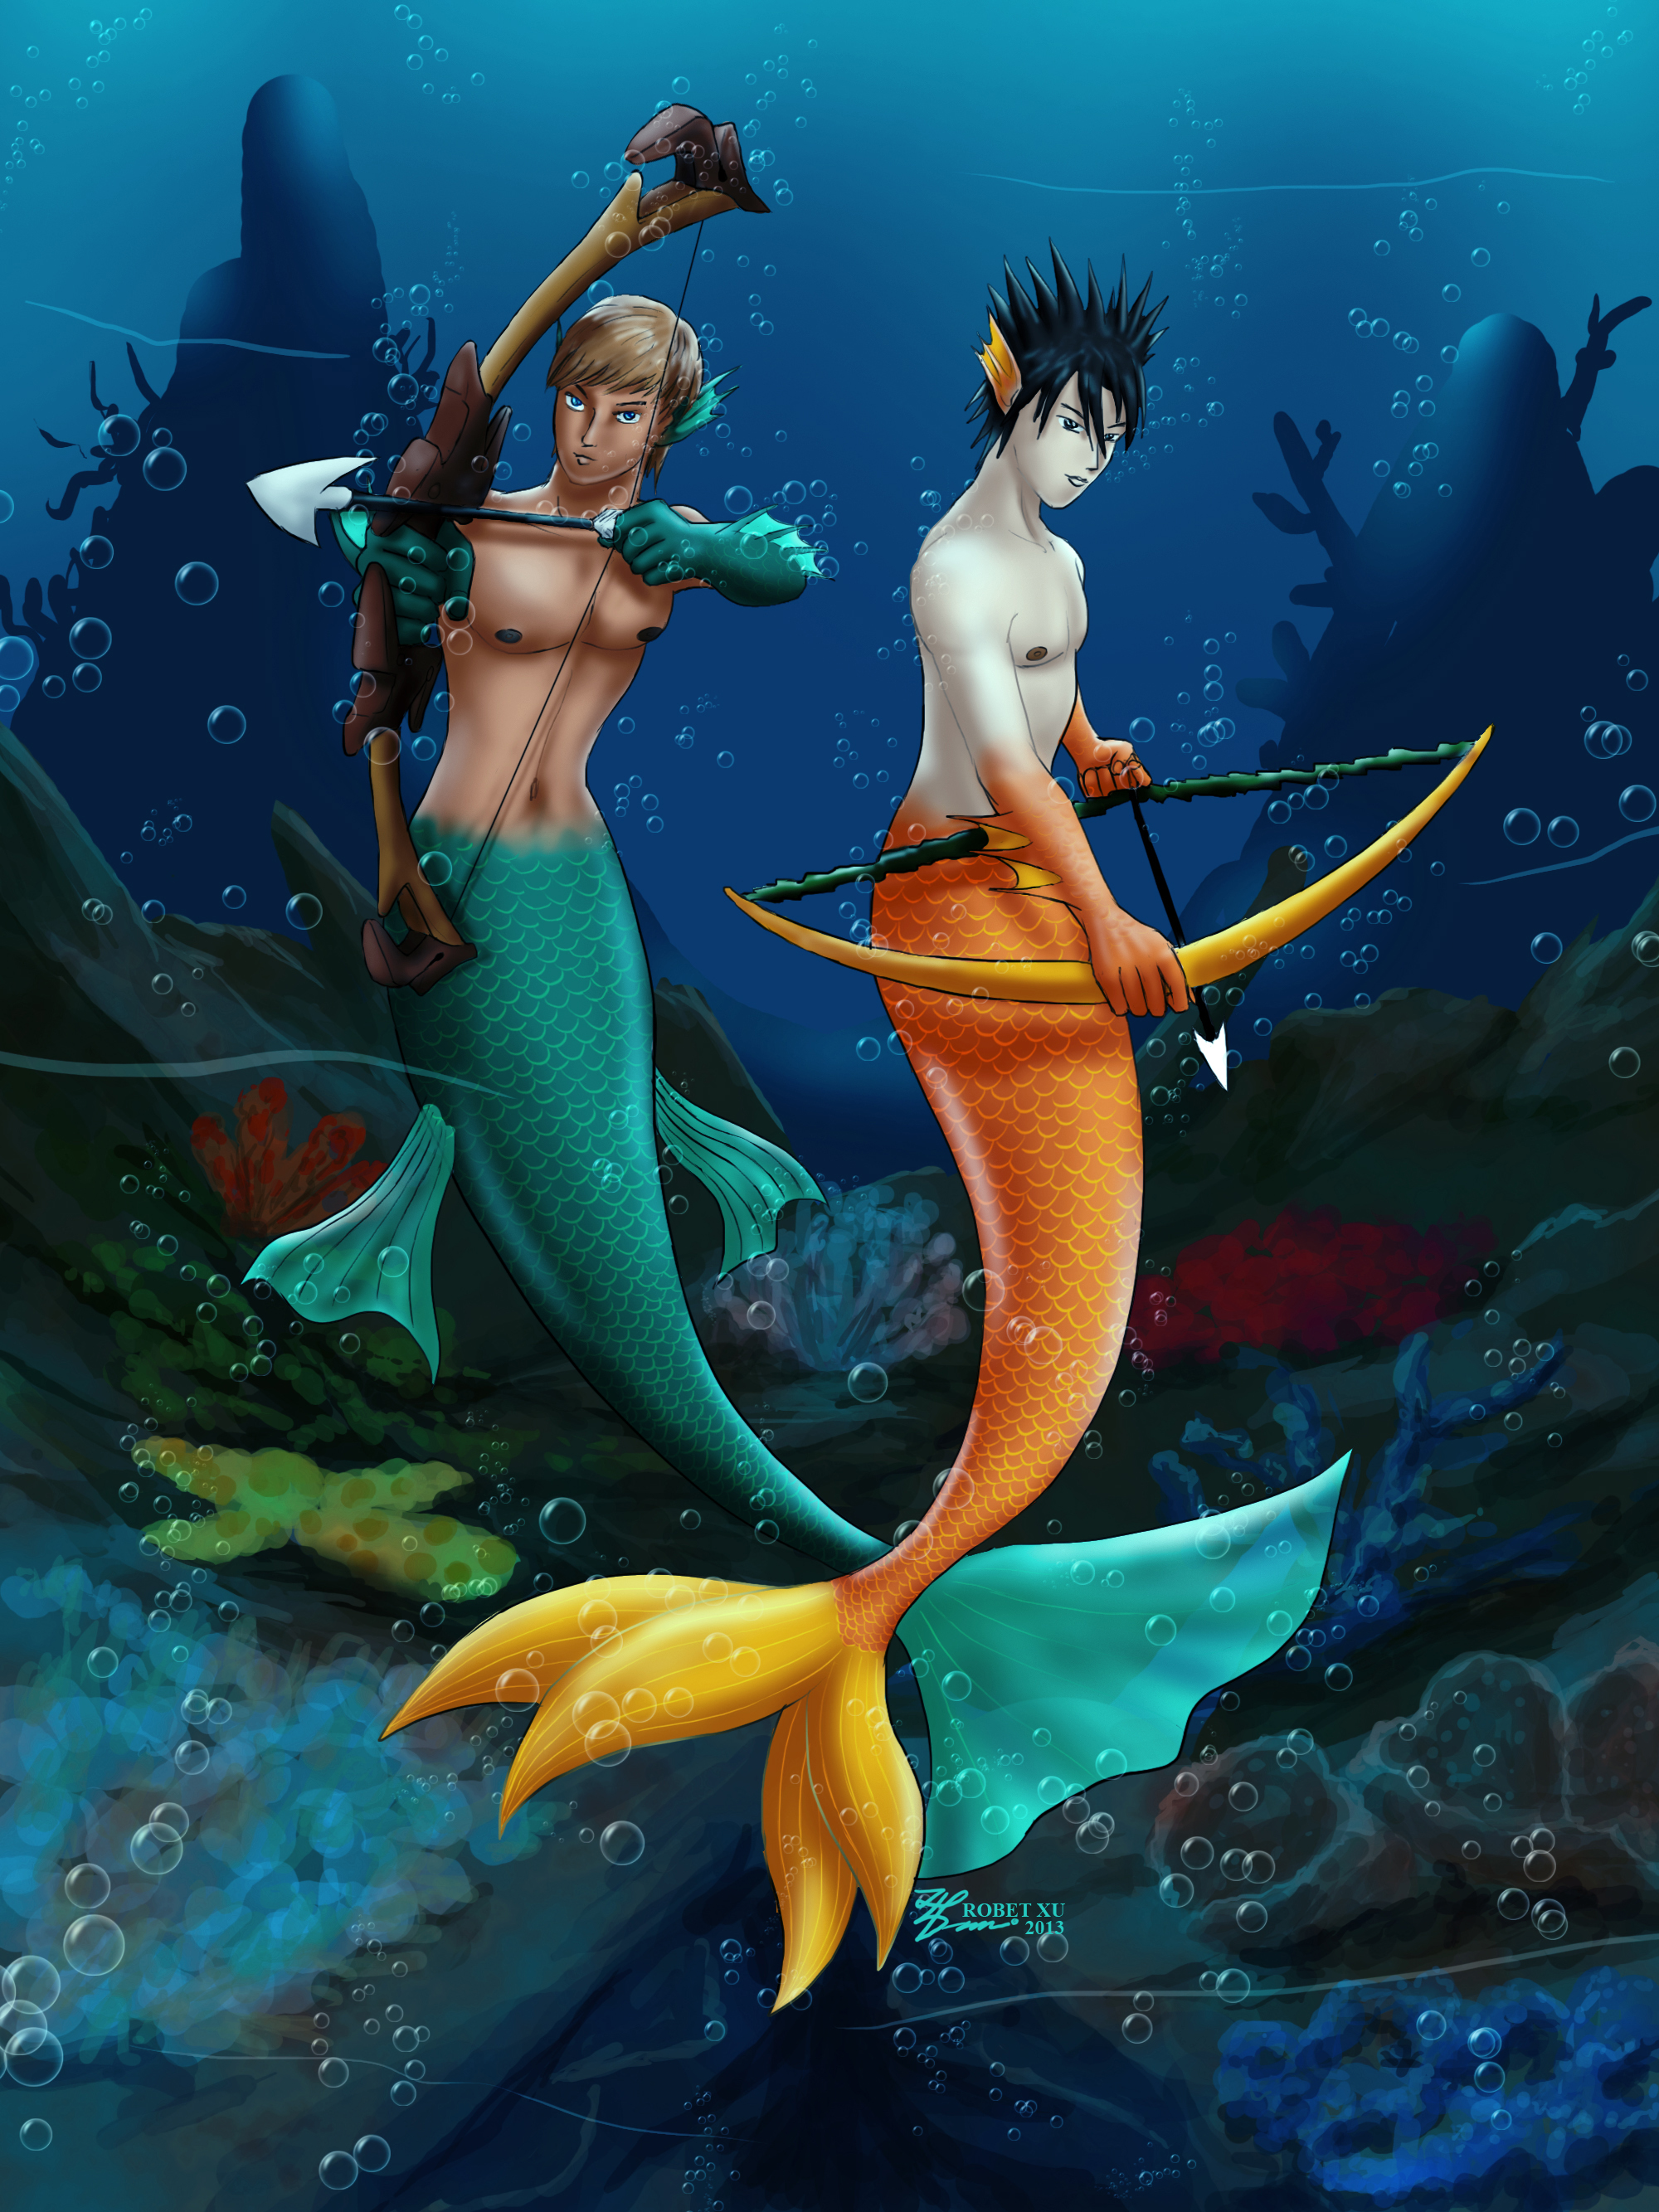 Merman Thaylen and his brother in arms